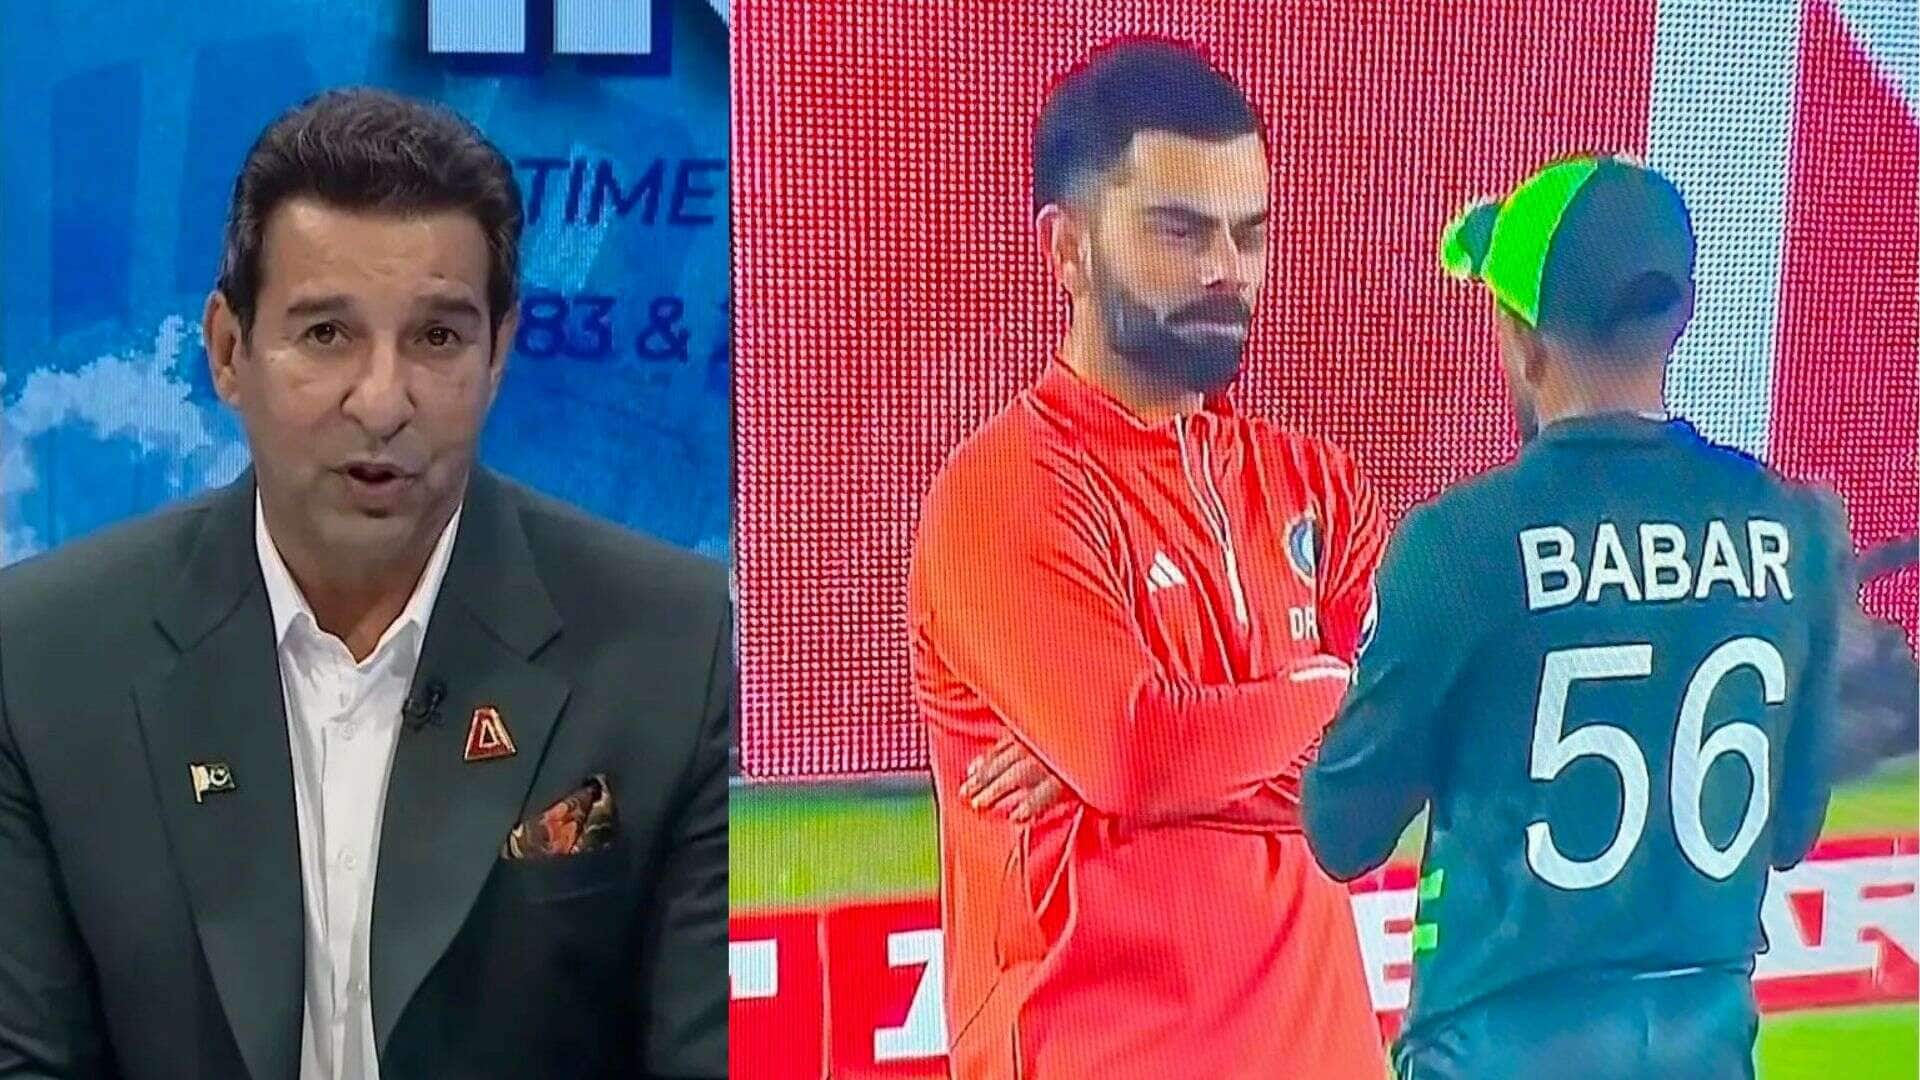 'They Shouldn't Have Met…' - Wasim Akram Unhappy With Kohli-Babar